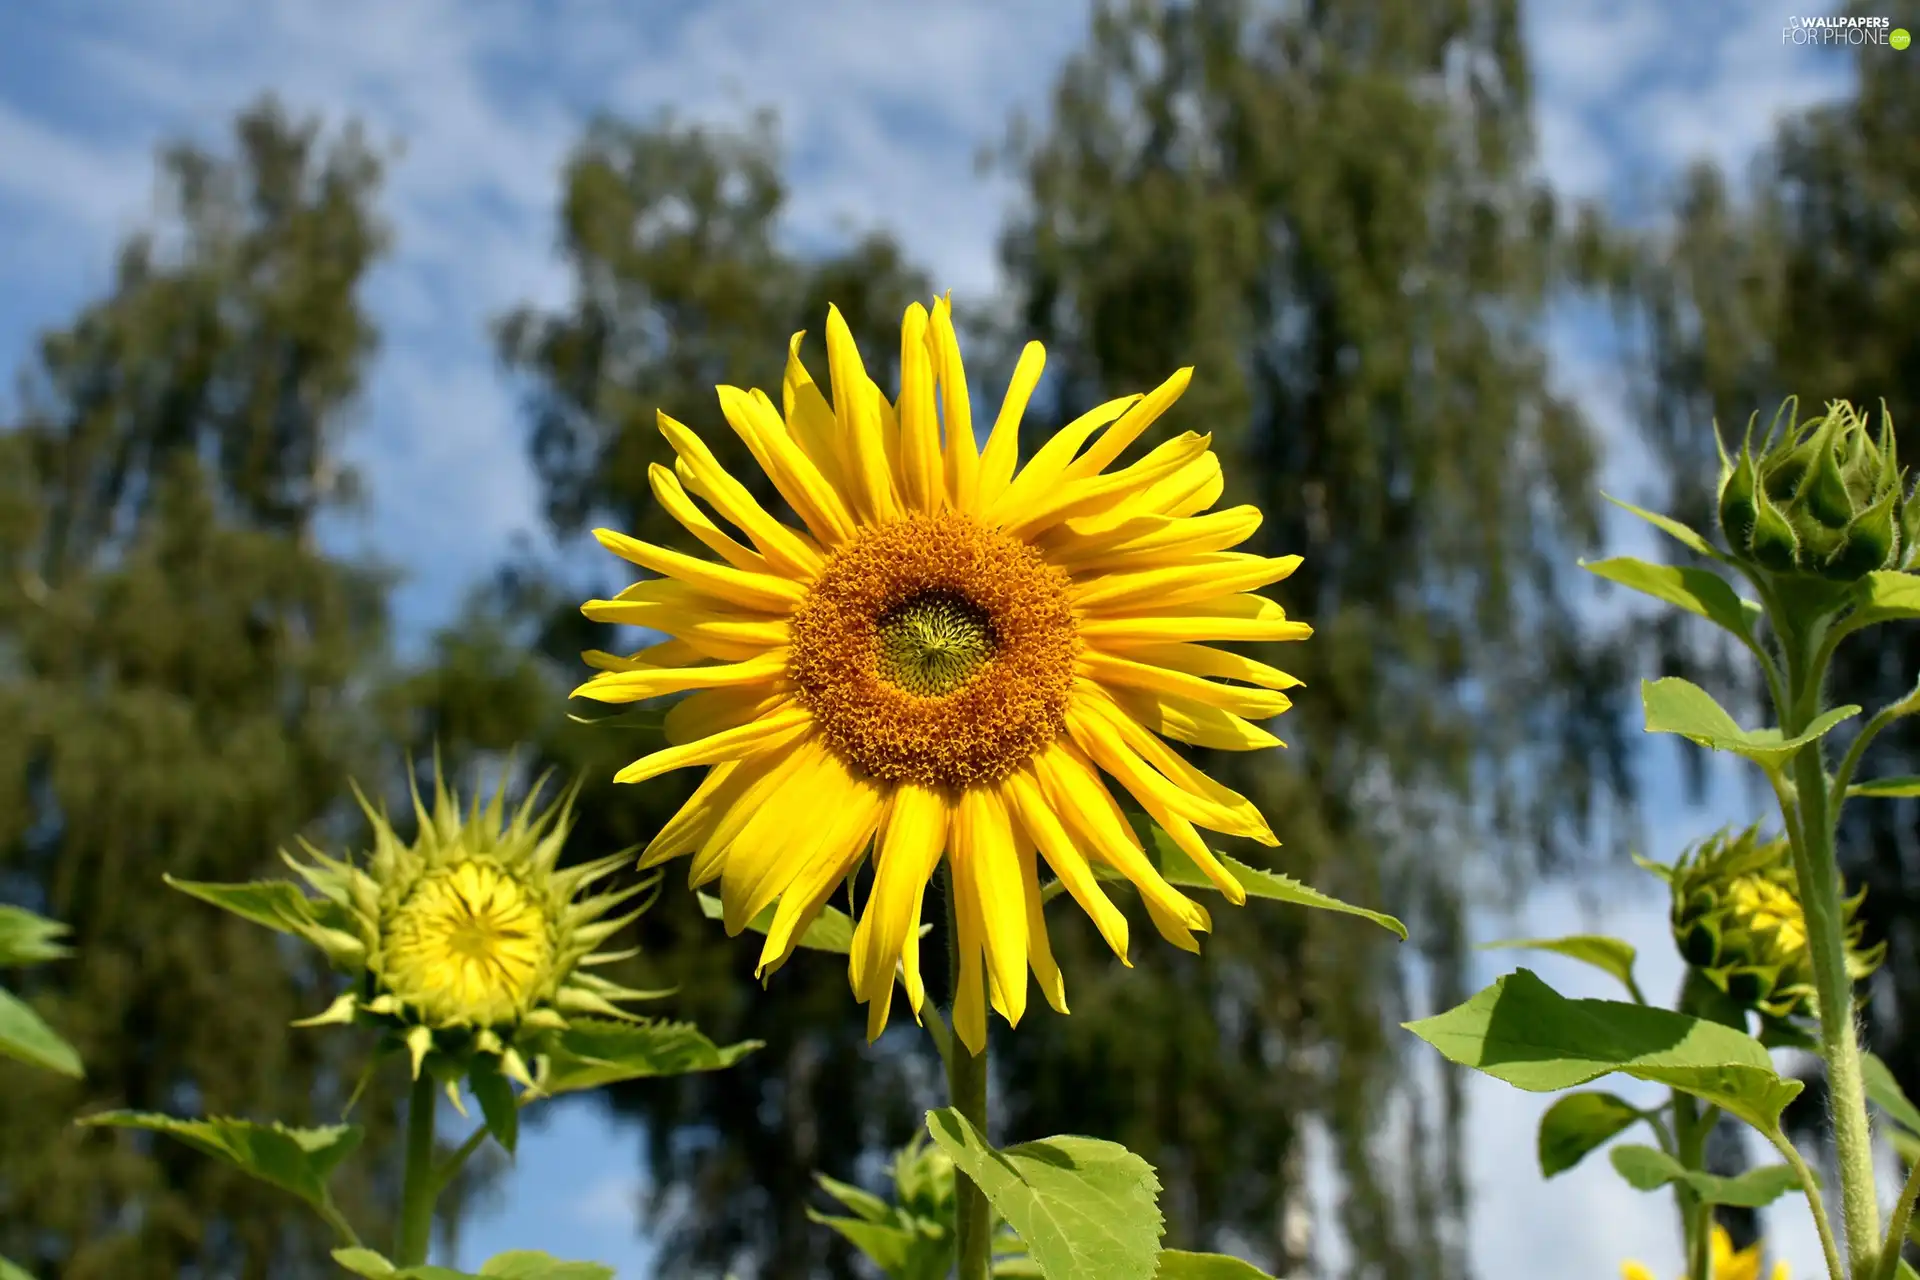 viewes, blurry background, Nice sunflowers, trees, Flowers